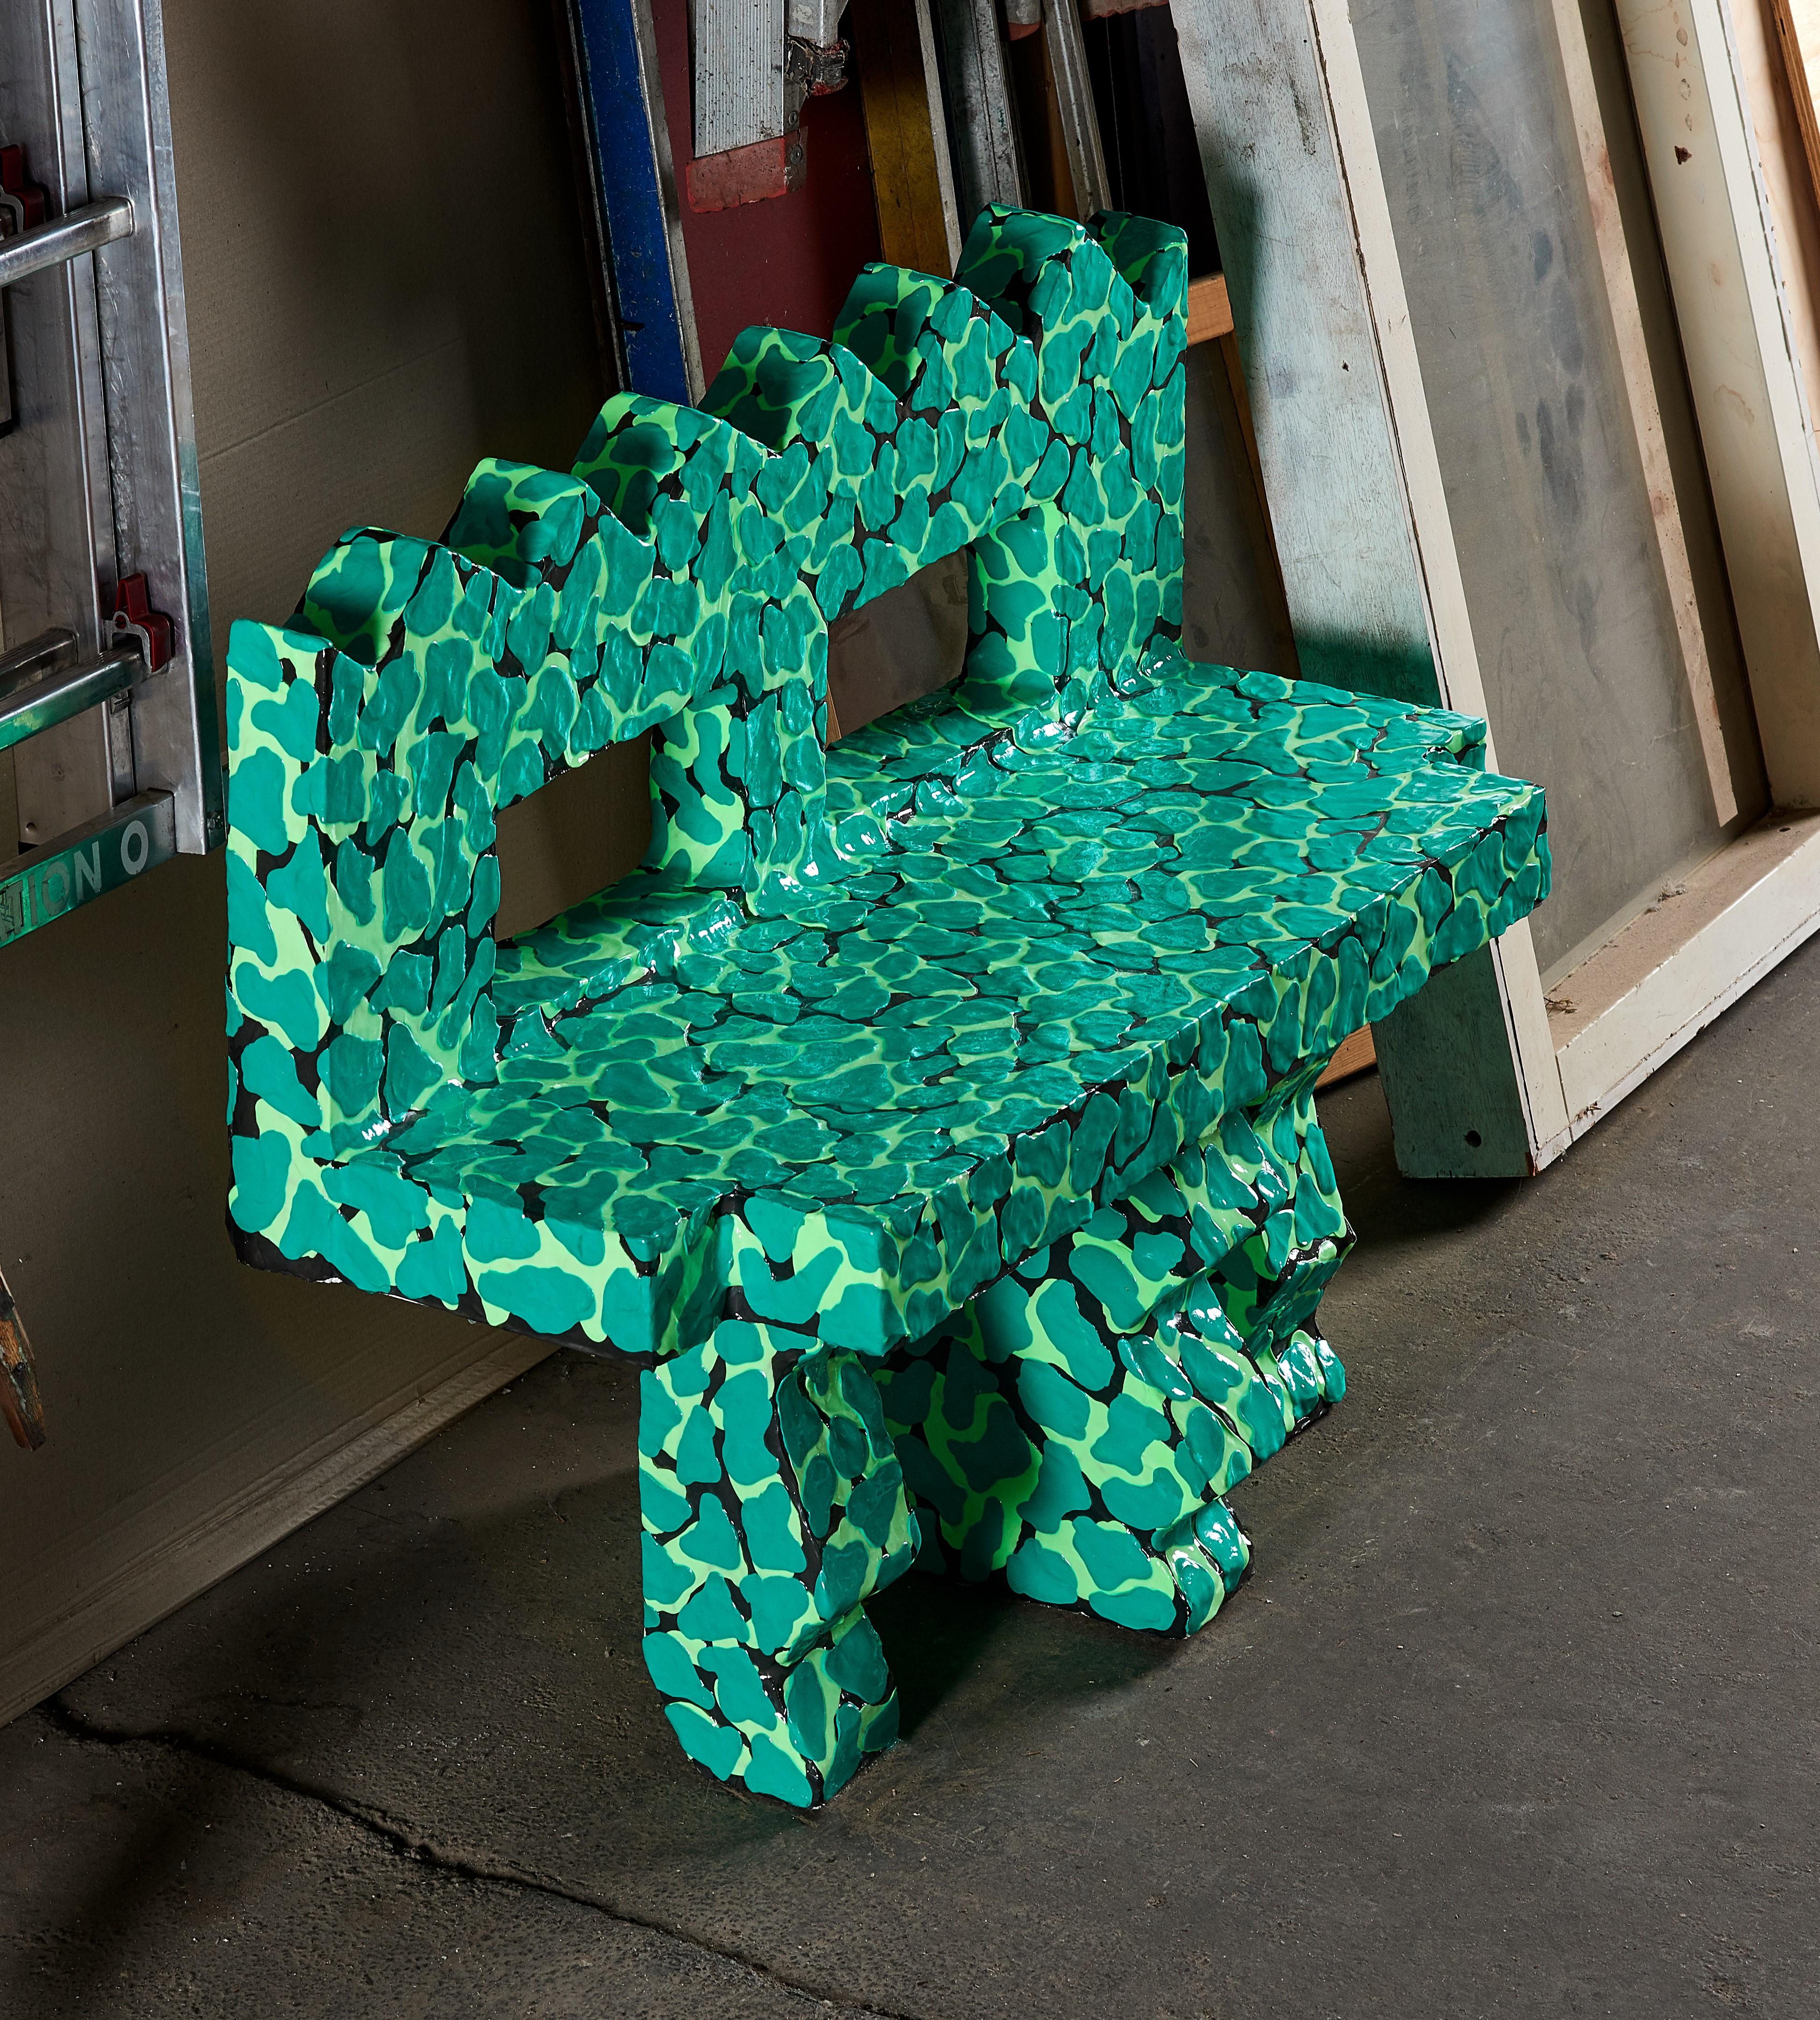 Dutch Crocodile Bench Made in 766 Minutes by Minute Manufacturing